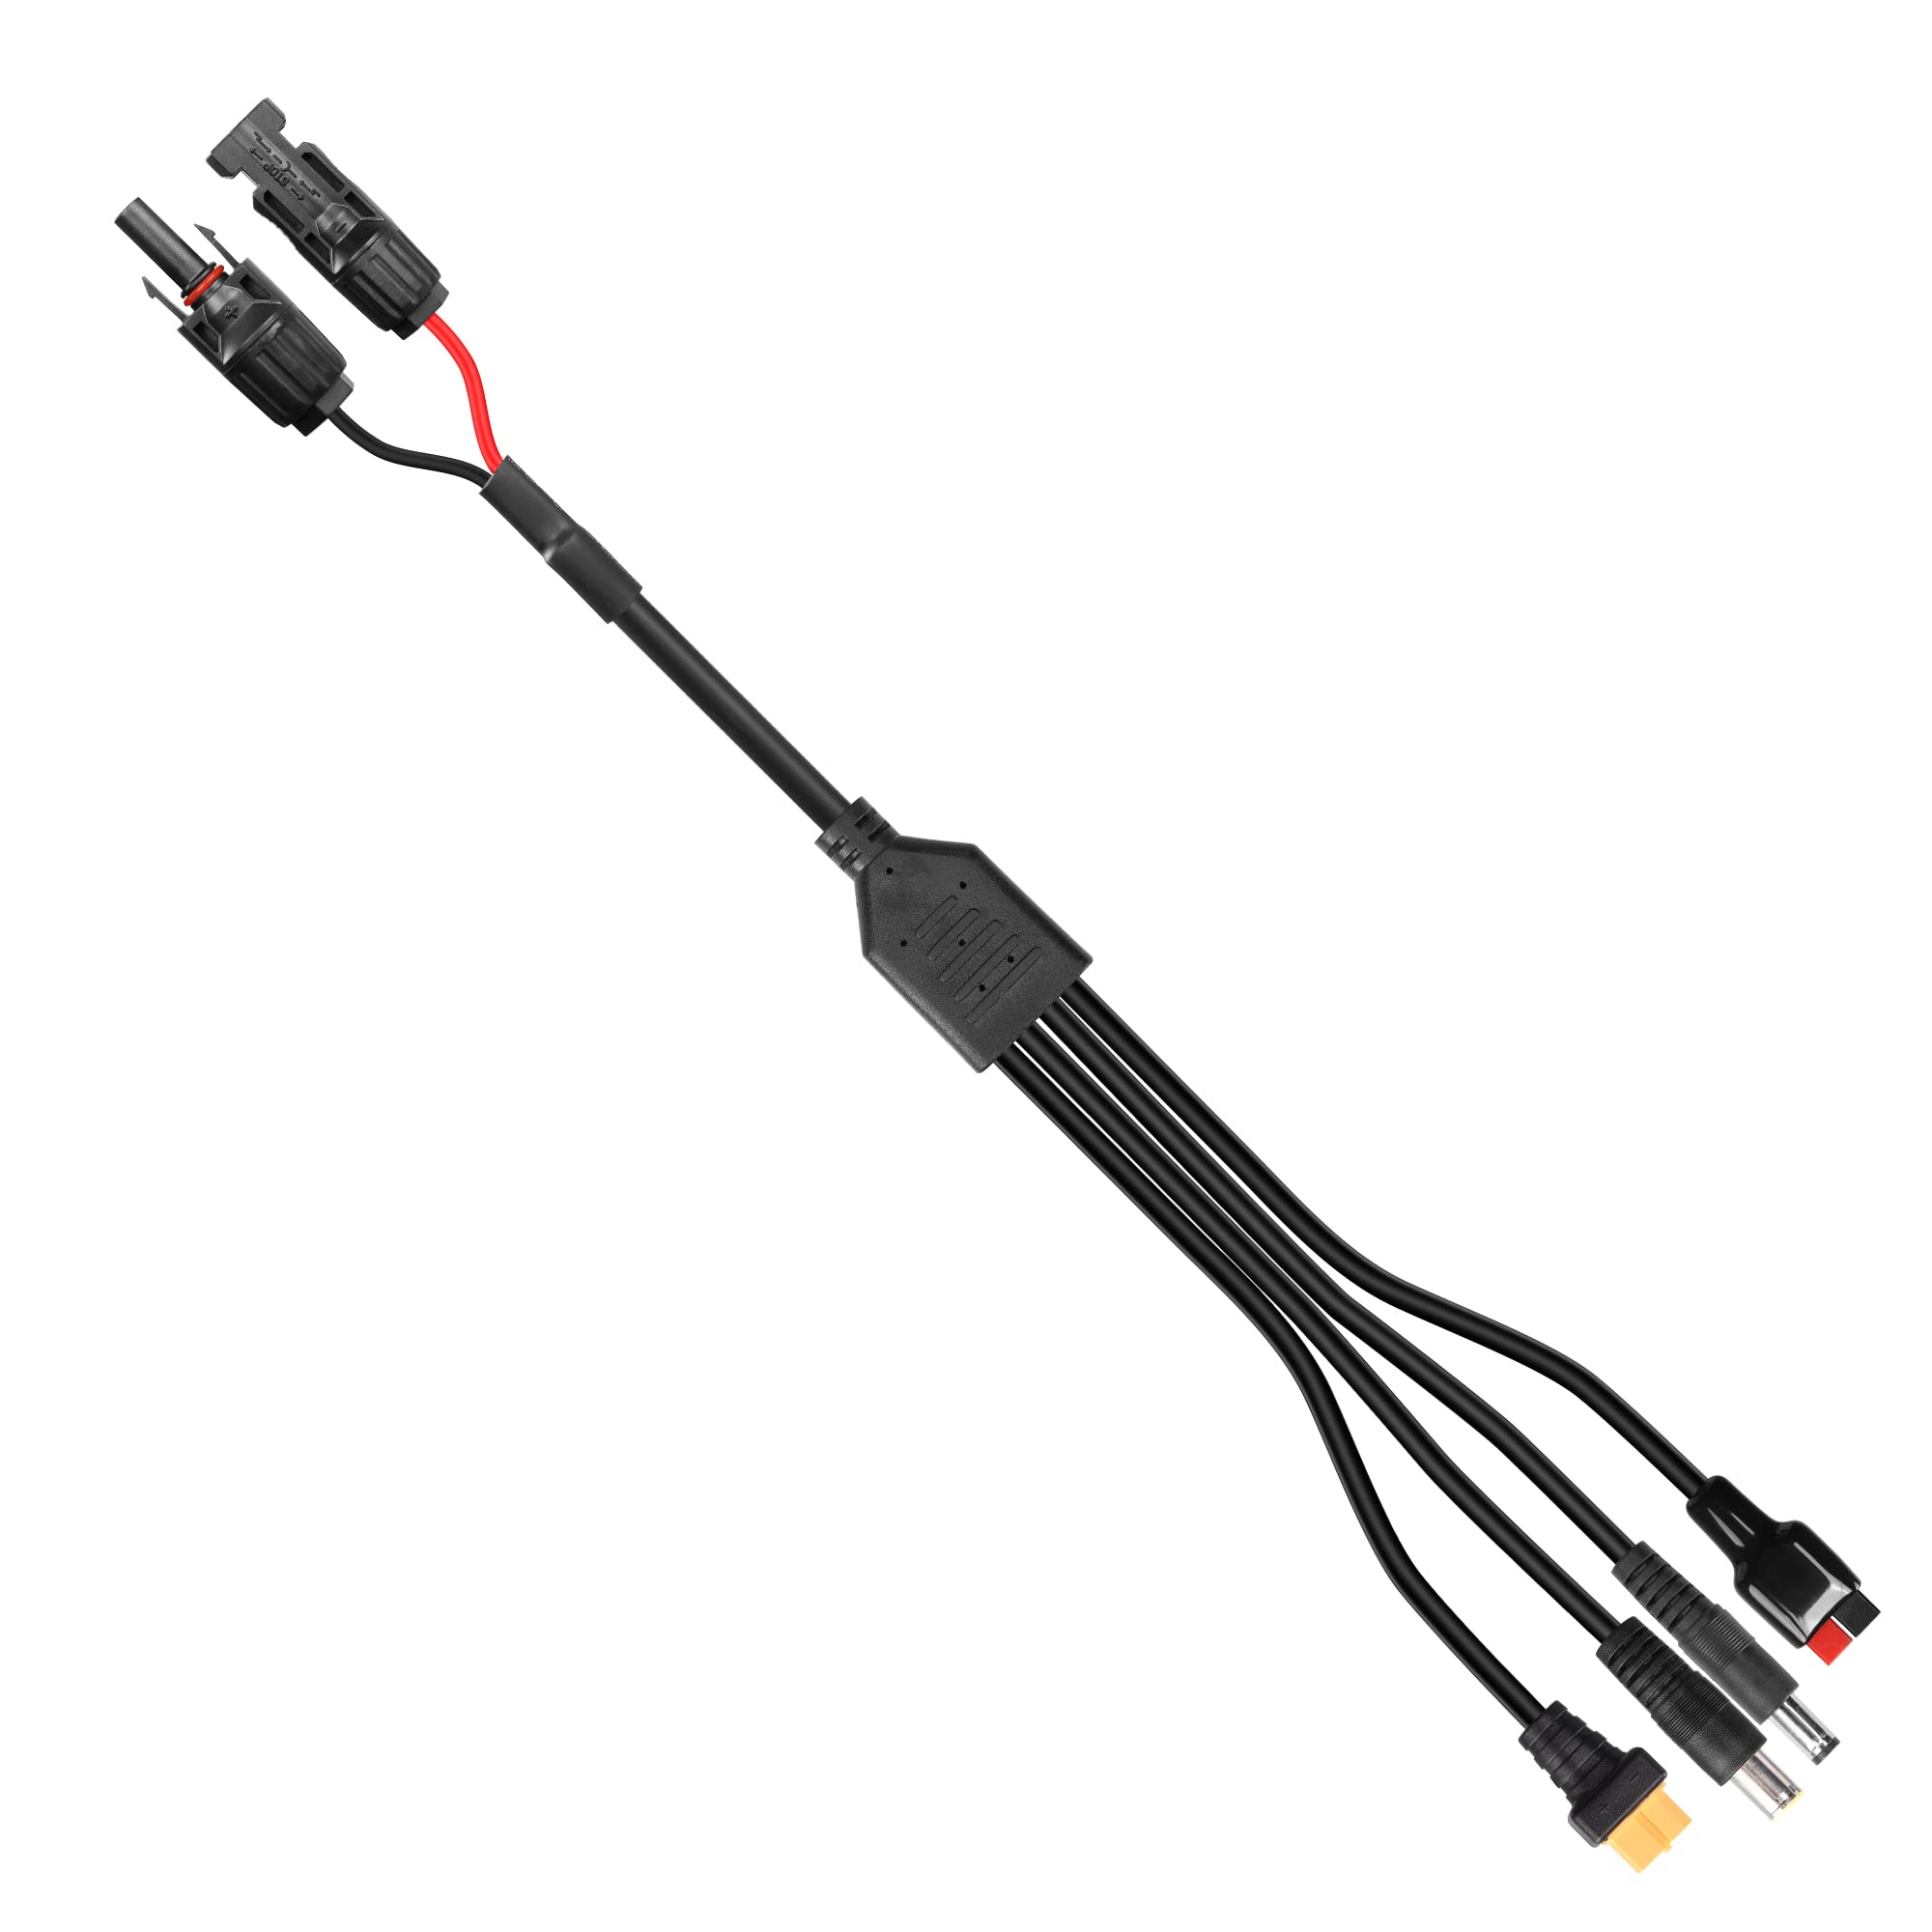 12V DC Y Distribution Cable, Y Cable, Multiple Cable, 30cm, 5.5x2.1mm -  Excellen